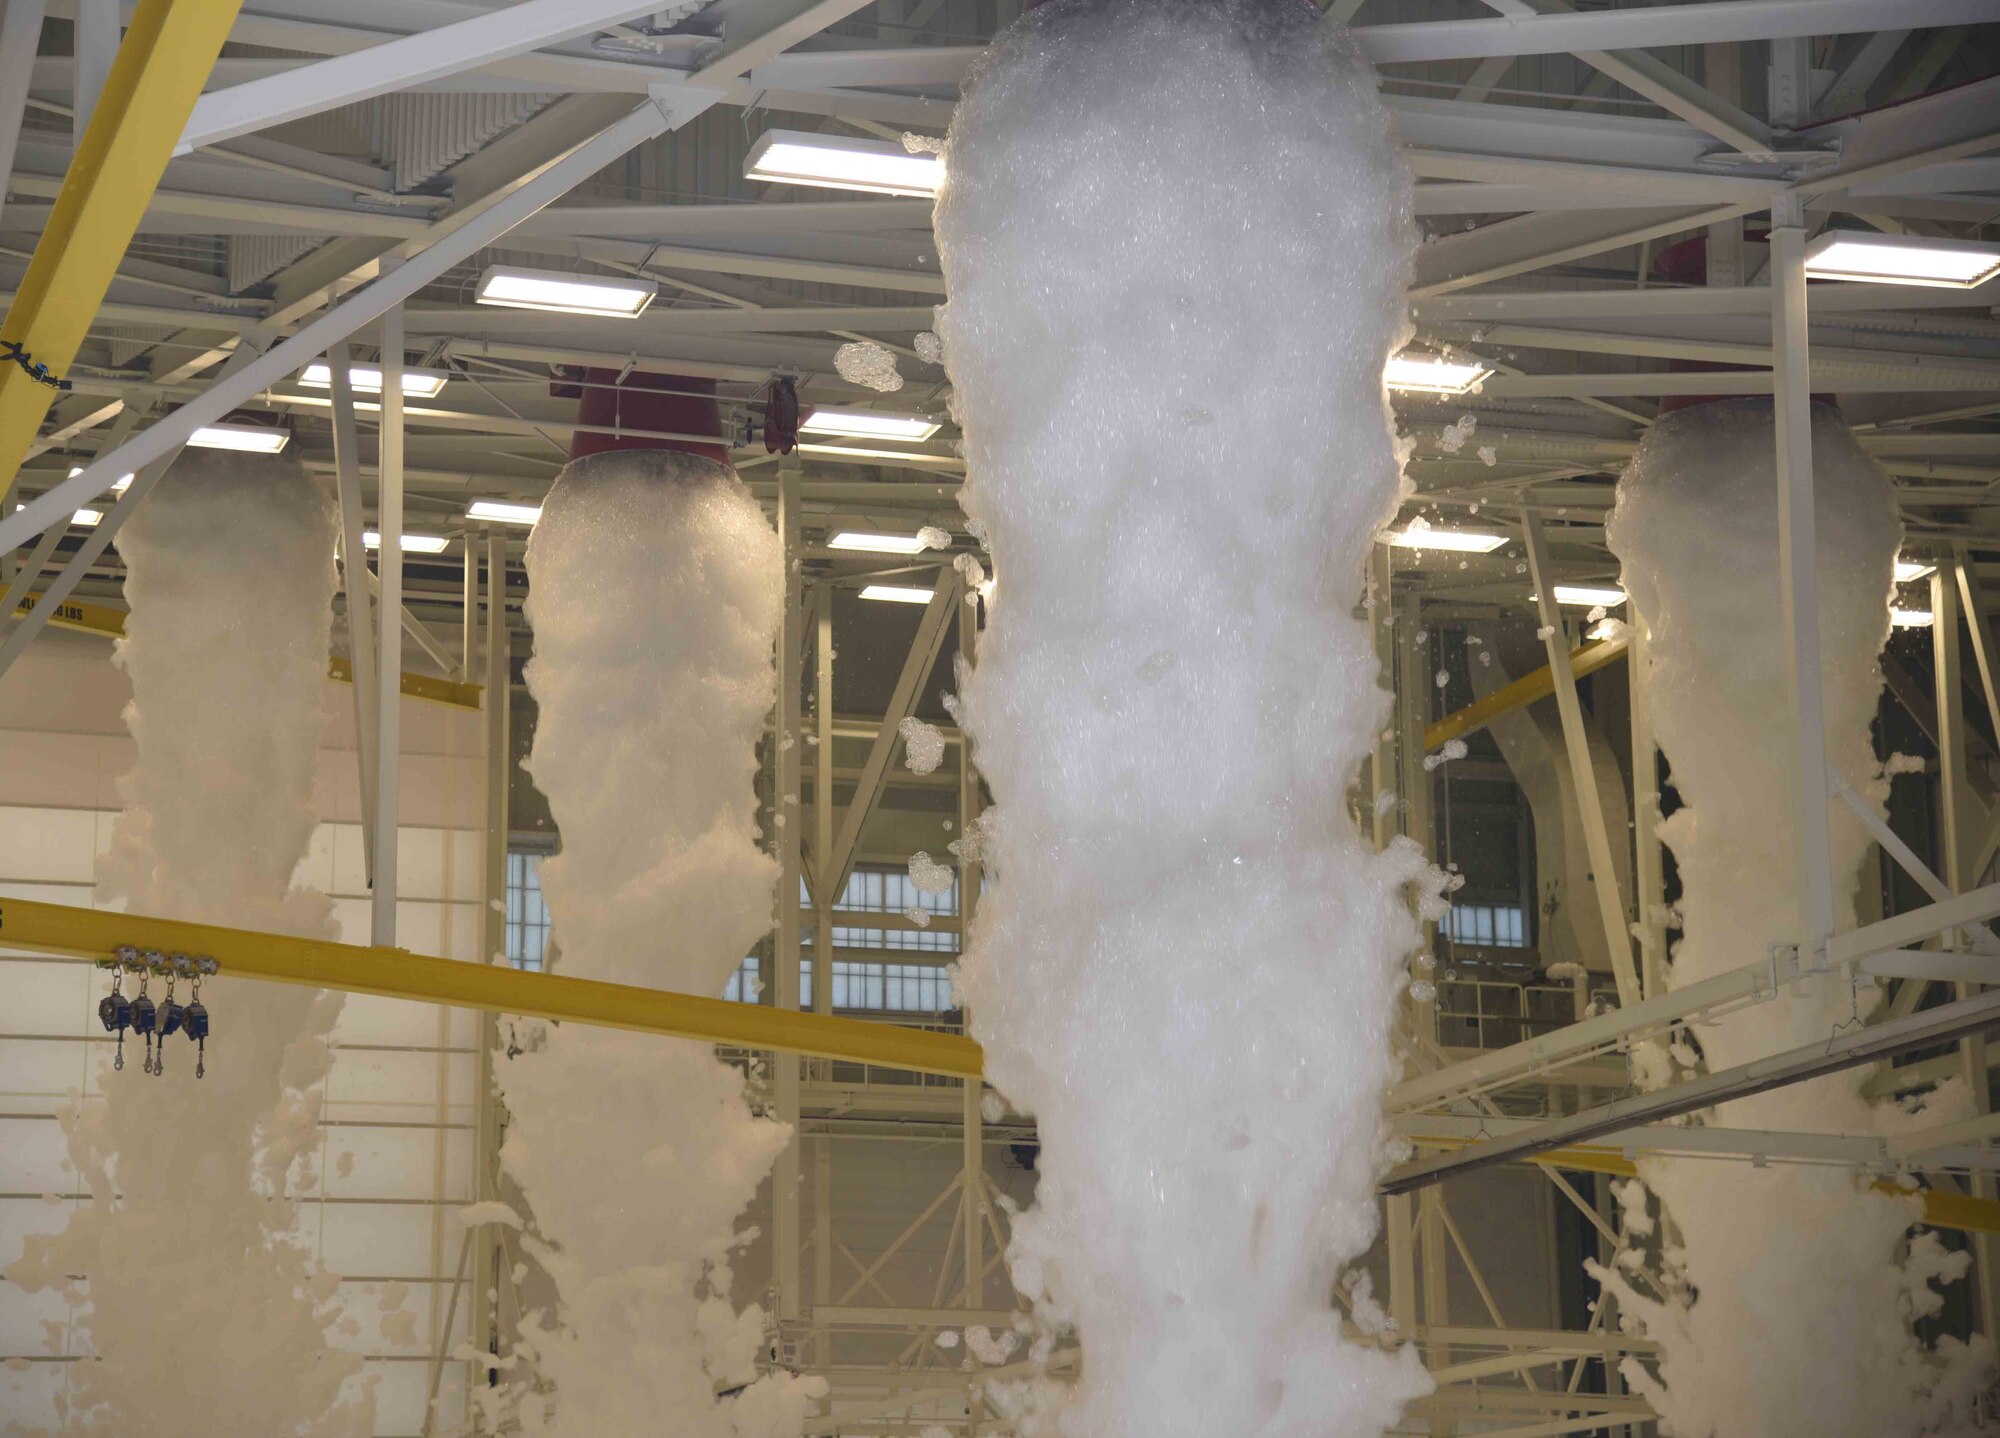 Foam from a fire suppression system pours from generators on the ceiling of a KC-46 Pegasus hangar May 12, 2017 at McConnell Air Force Base, Kan. A test was performed in the three-bay hangar as part of the final inspections to the building. (U.S. Air Force photo/Airman 1st Class Erin McClellan)